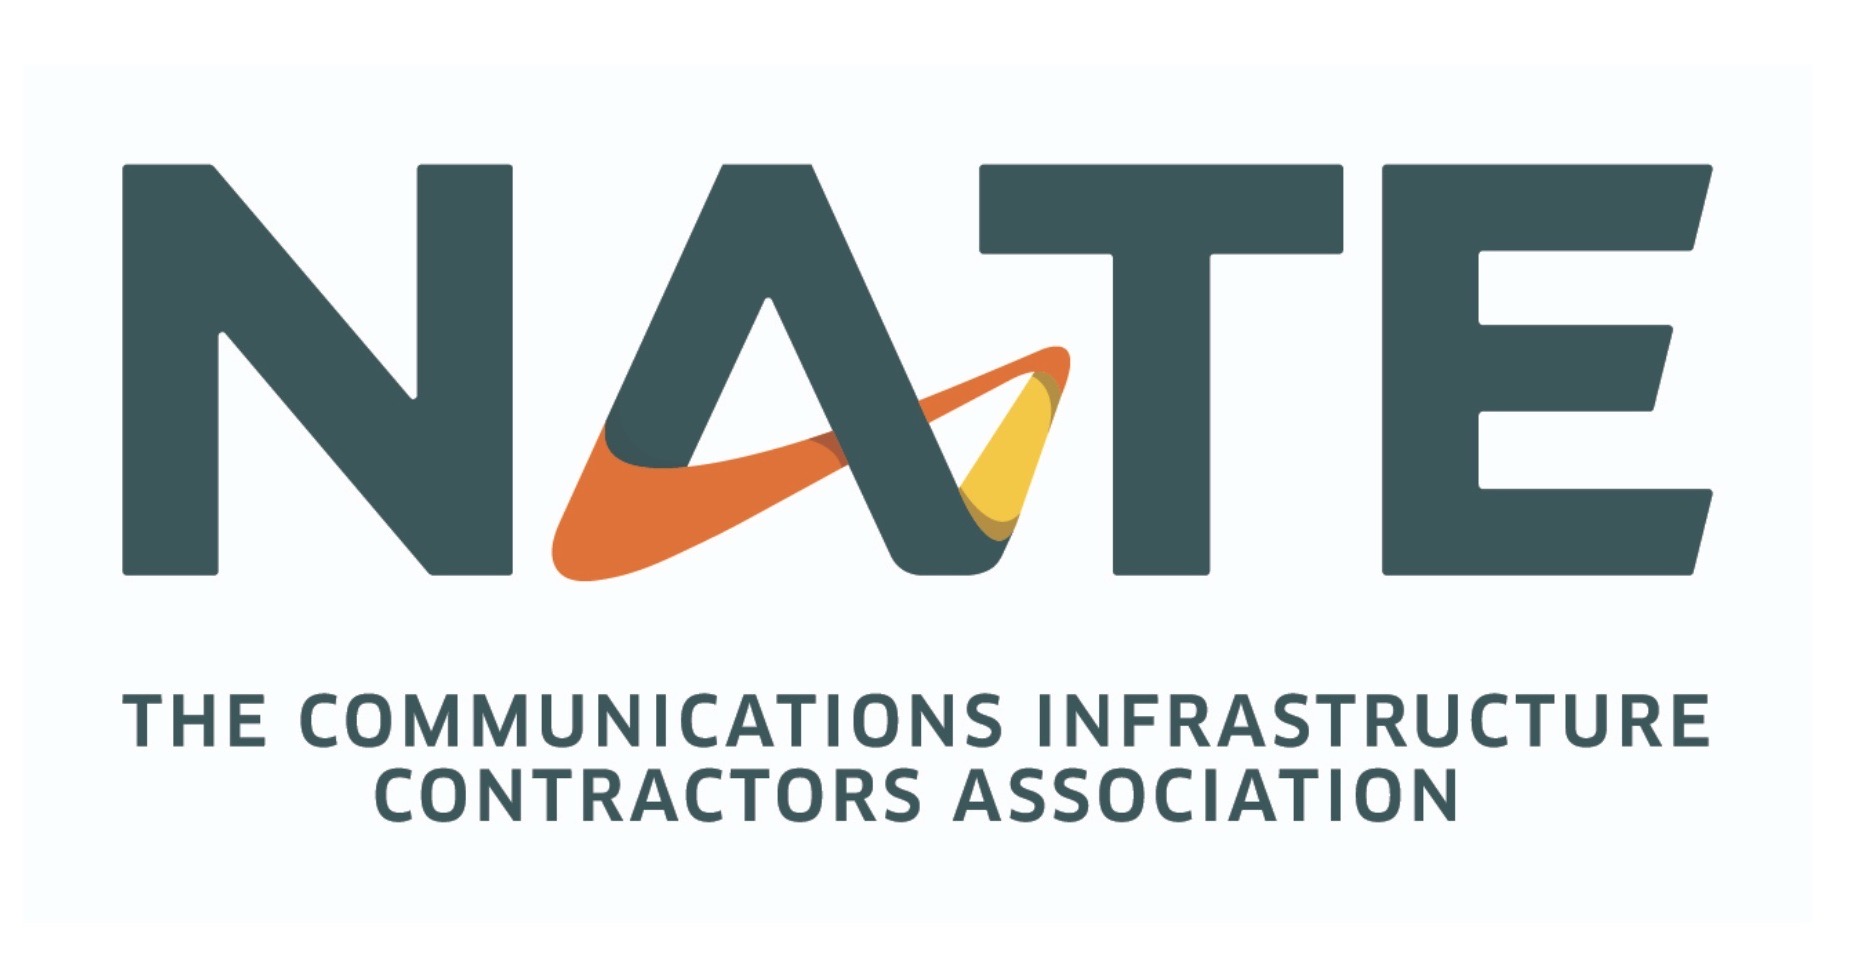 NATE: The Communications Infrastructure Contractors Association